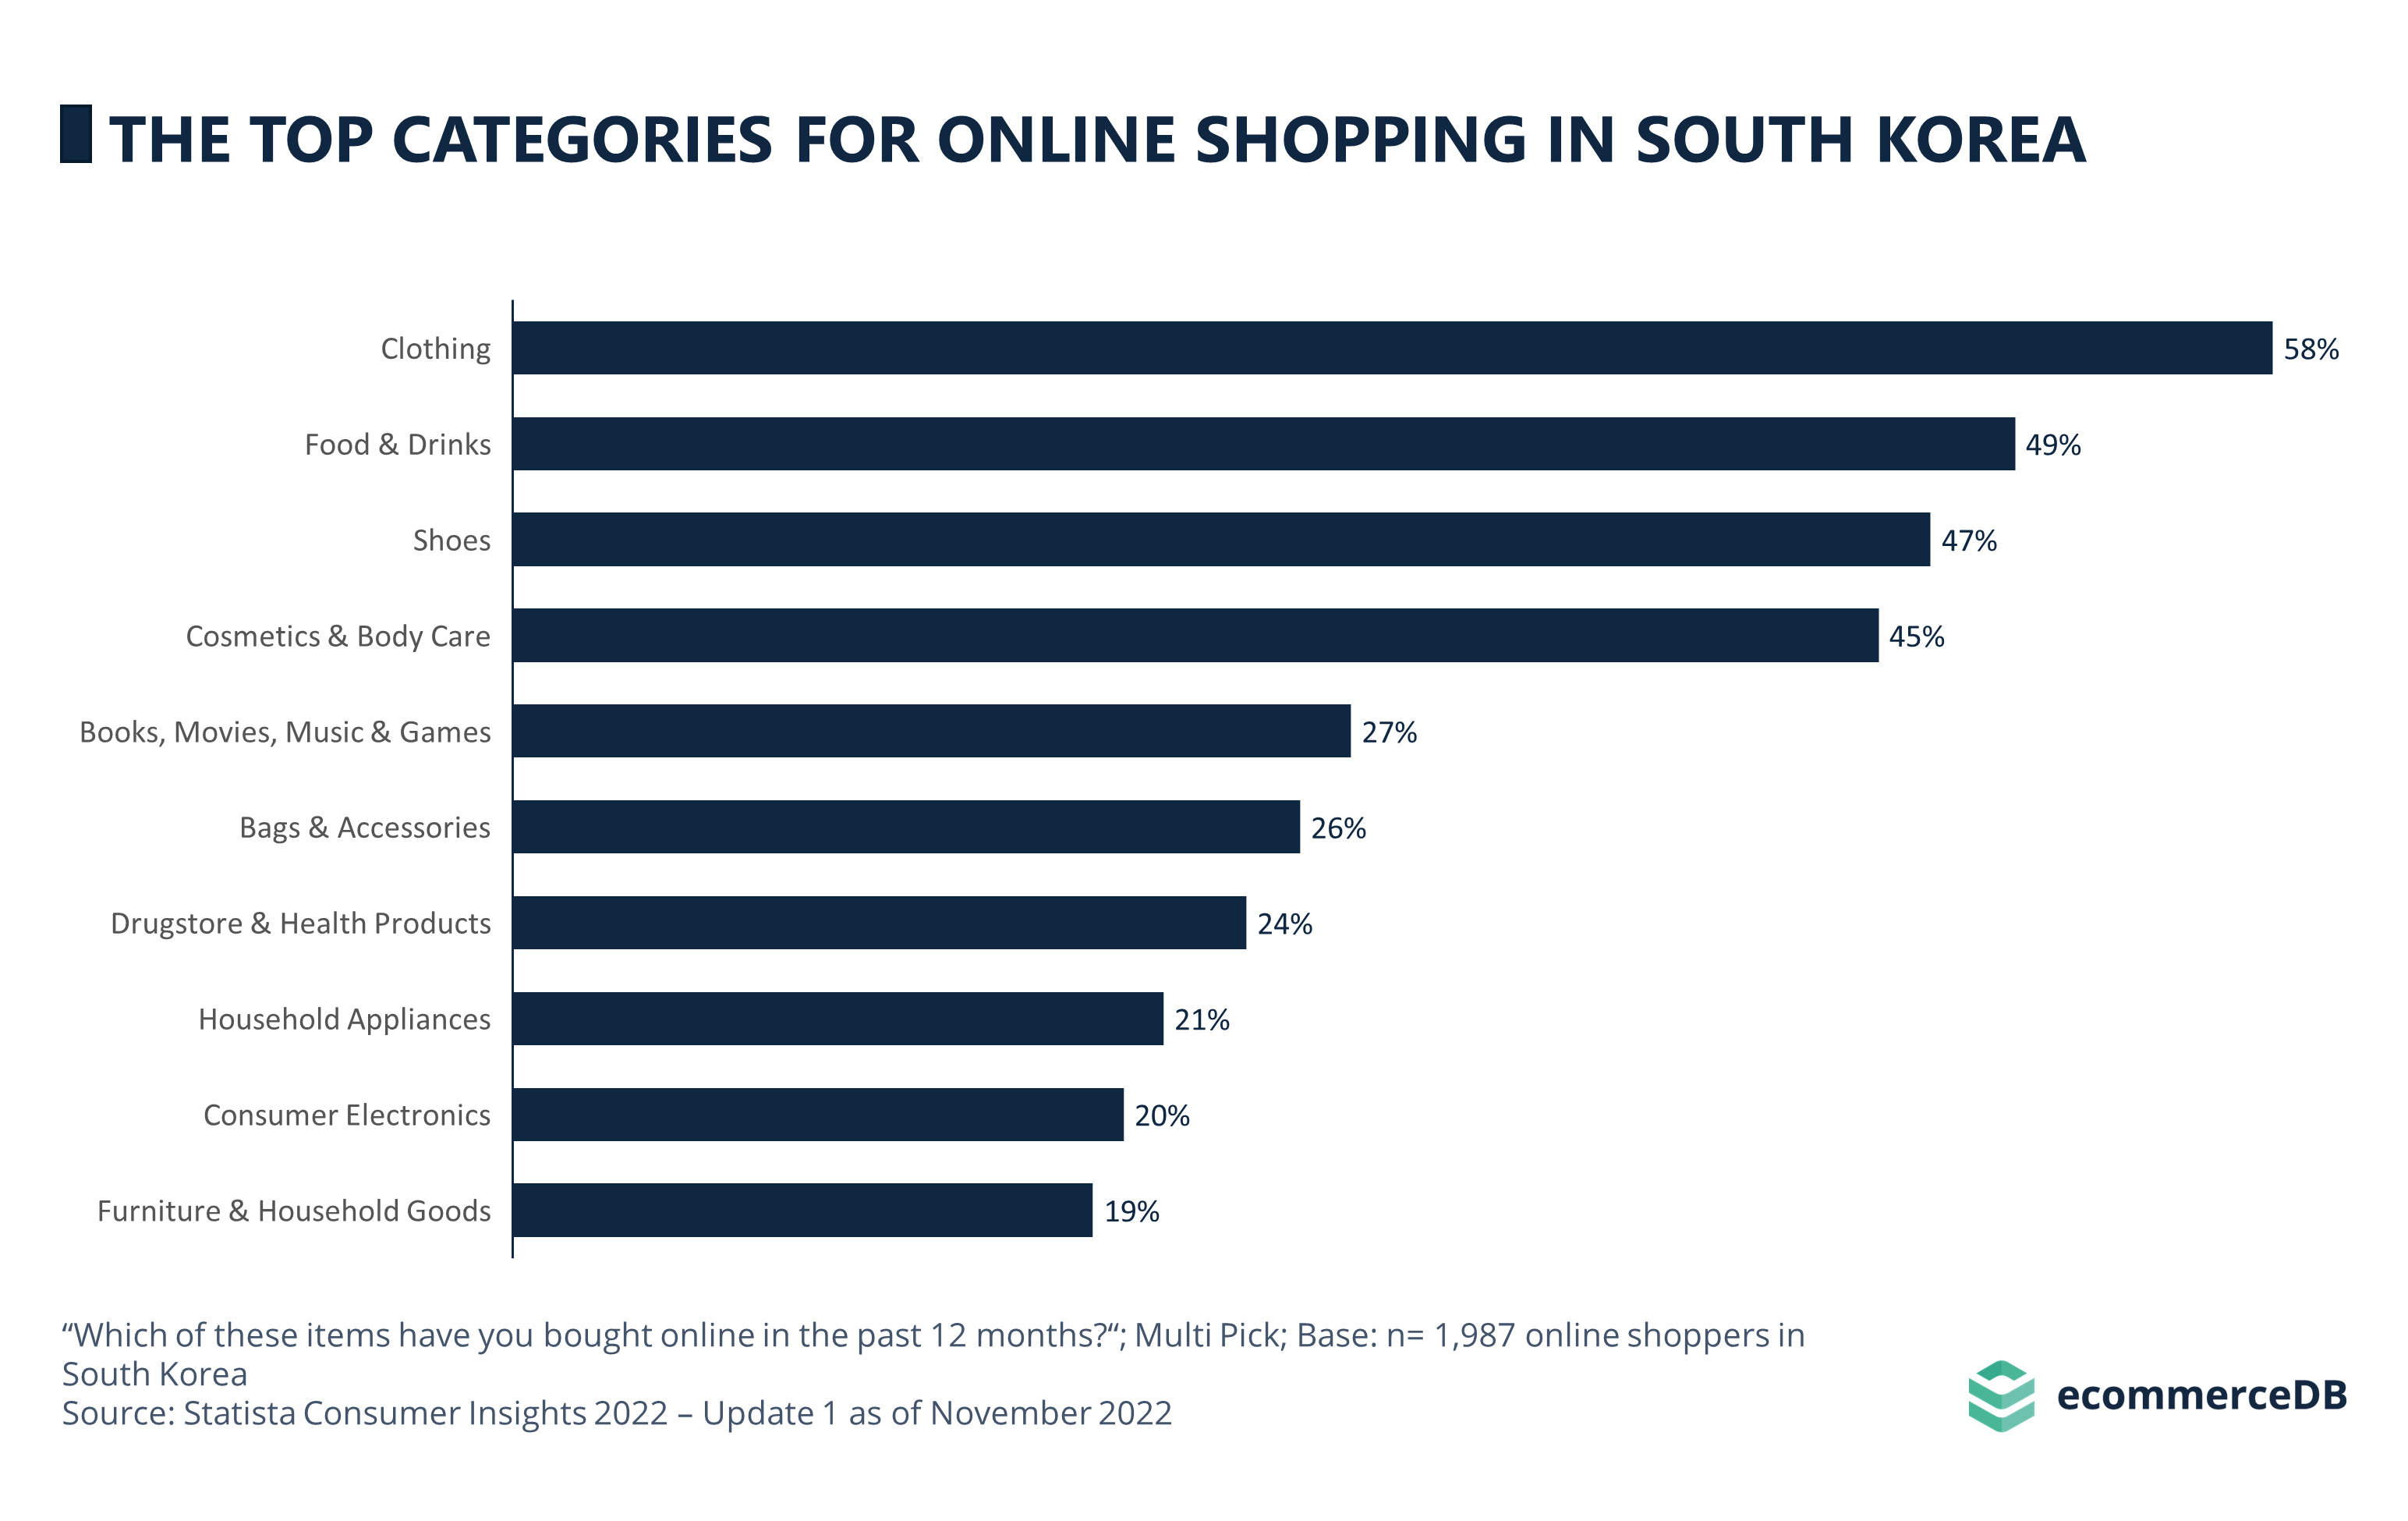 THE TOP CATEGORIES FOR ONLINE SHOPPING IN SOUTH KOREA